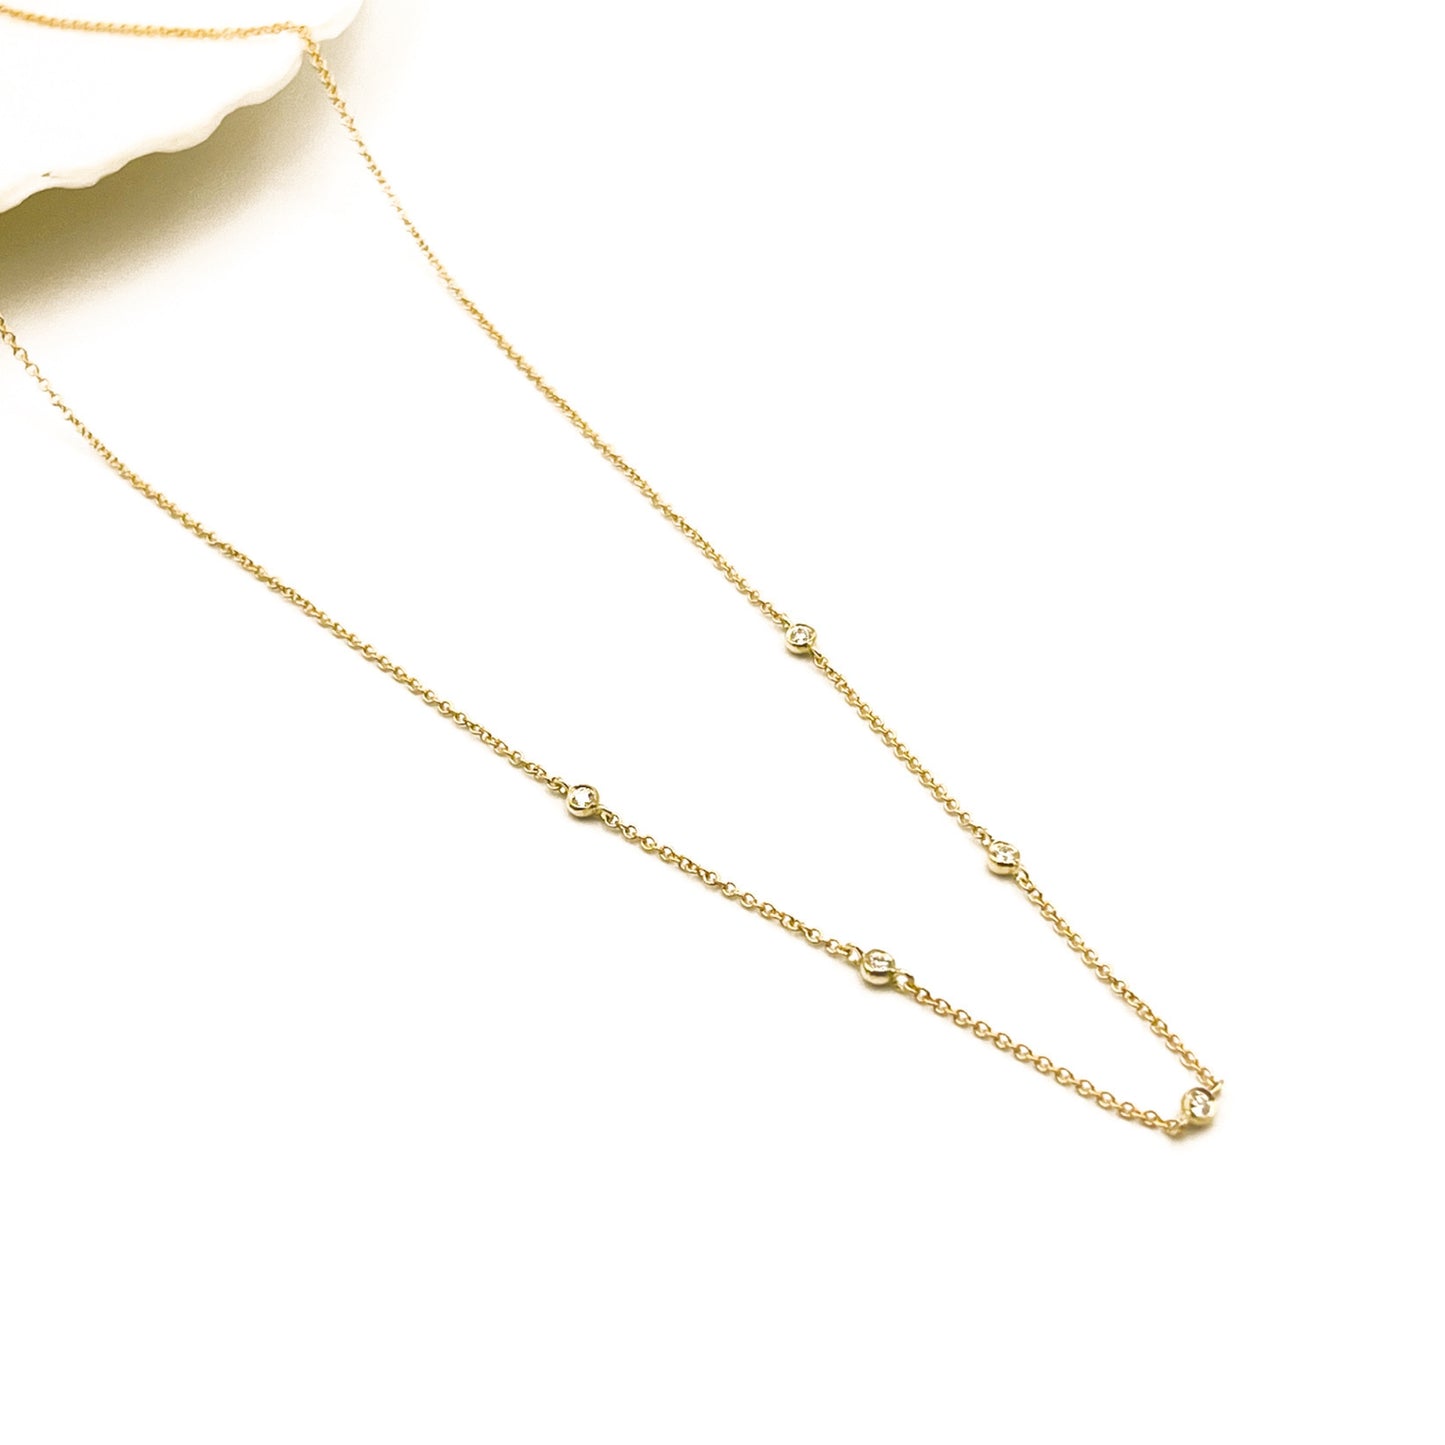 tiny moments 9ct yellow gold and white diamond necklace by Thor Collective 